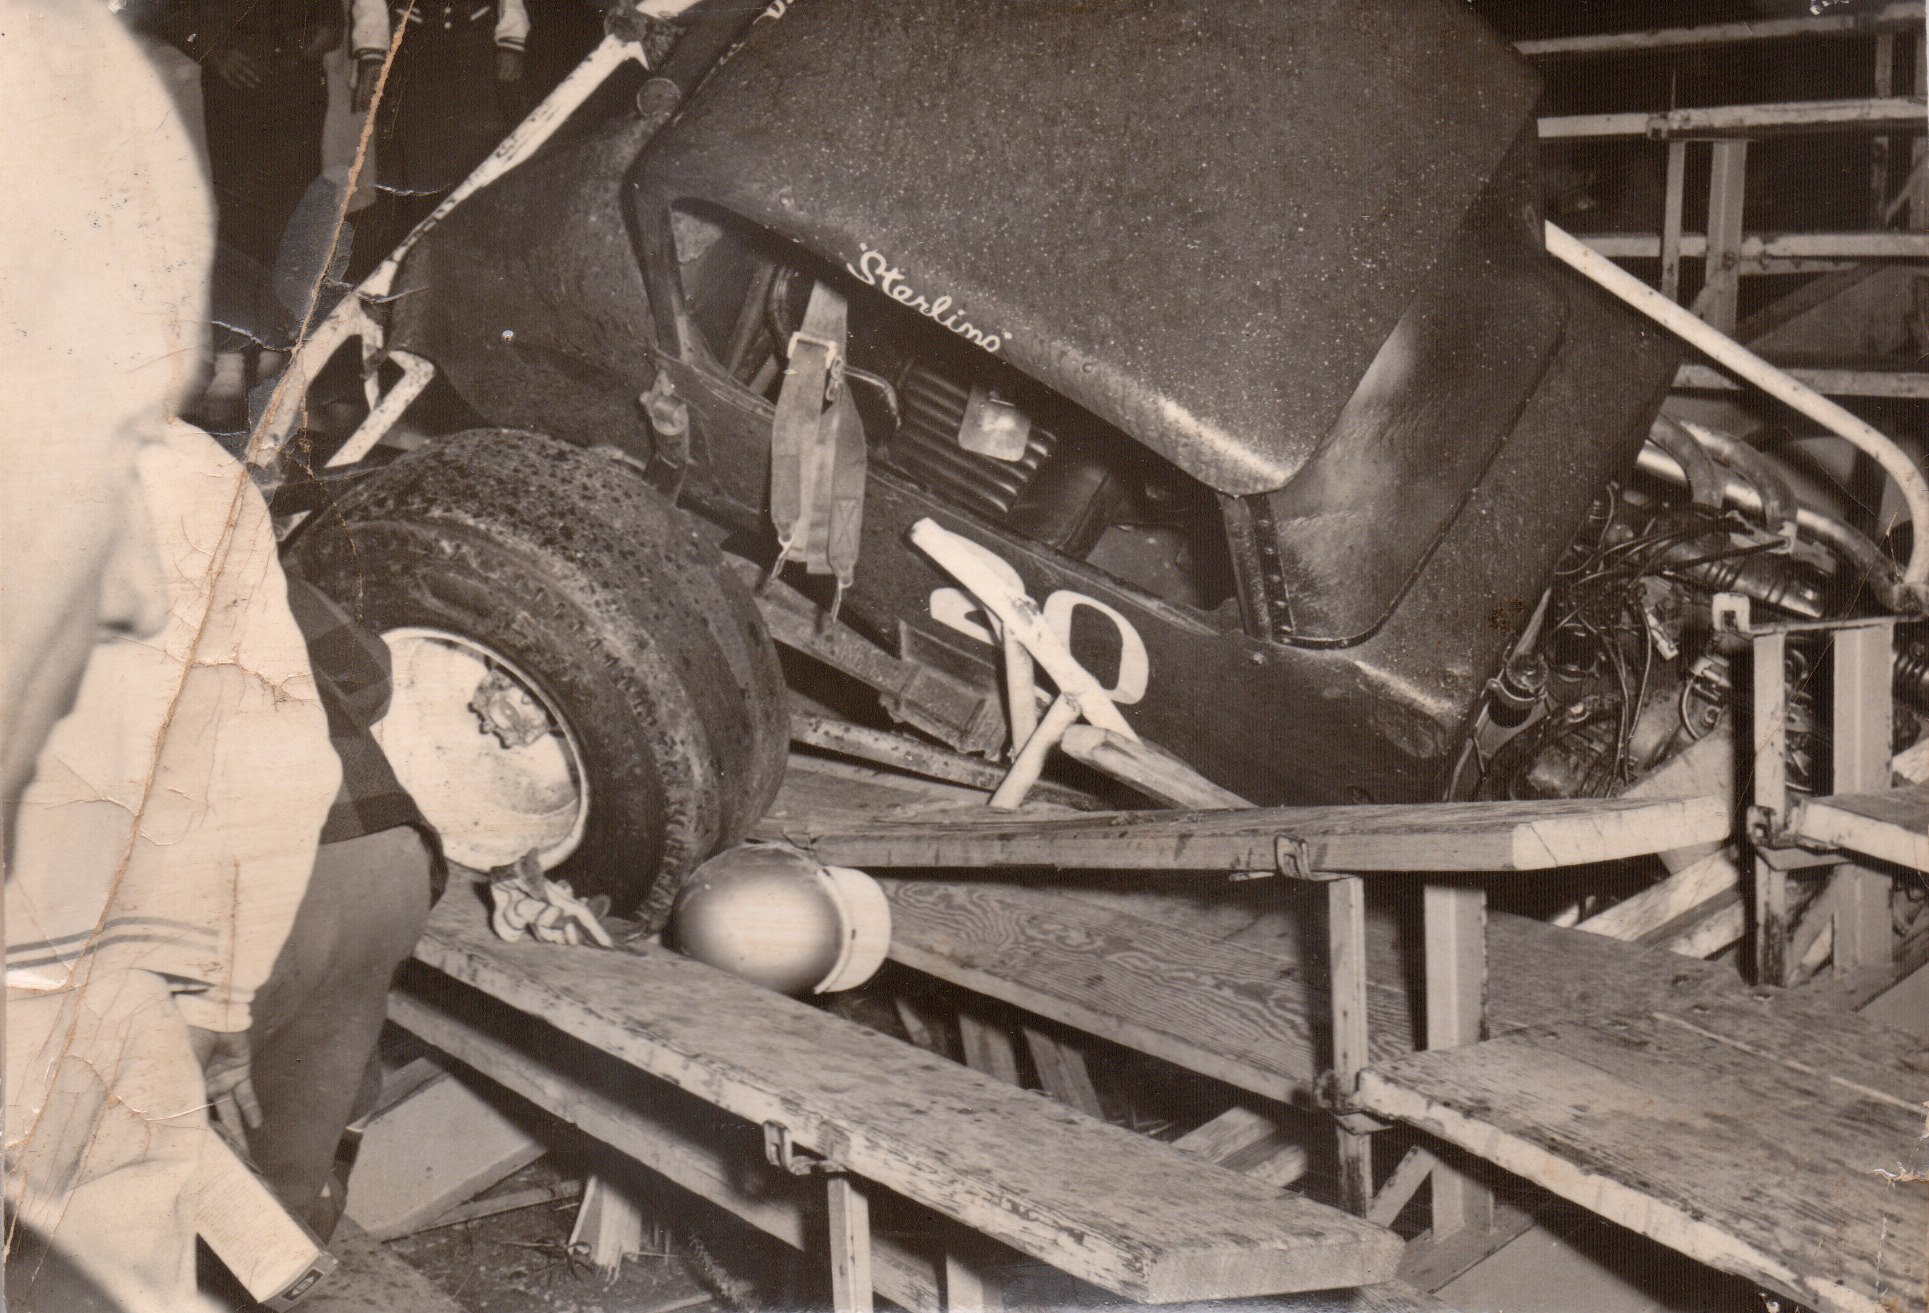 Gallery: 1950s/60s Modified/Super Modified Circle Track Photos – Wrecks, Action, More!